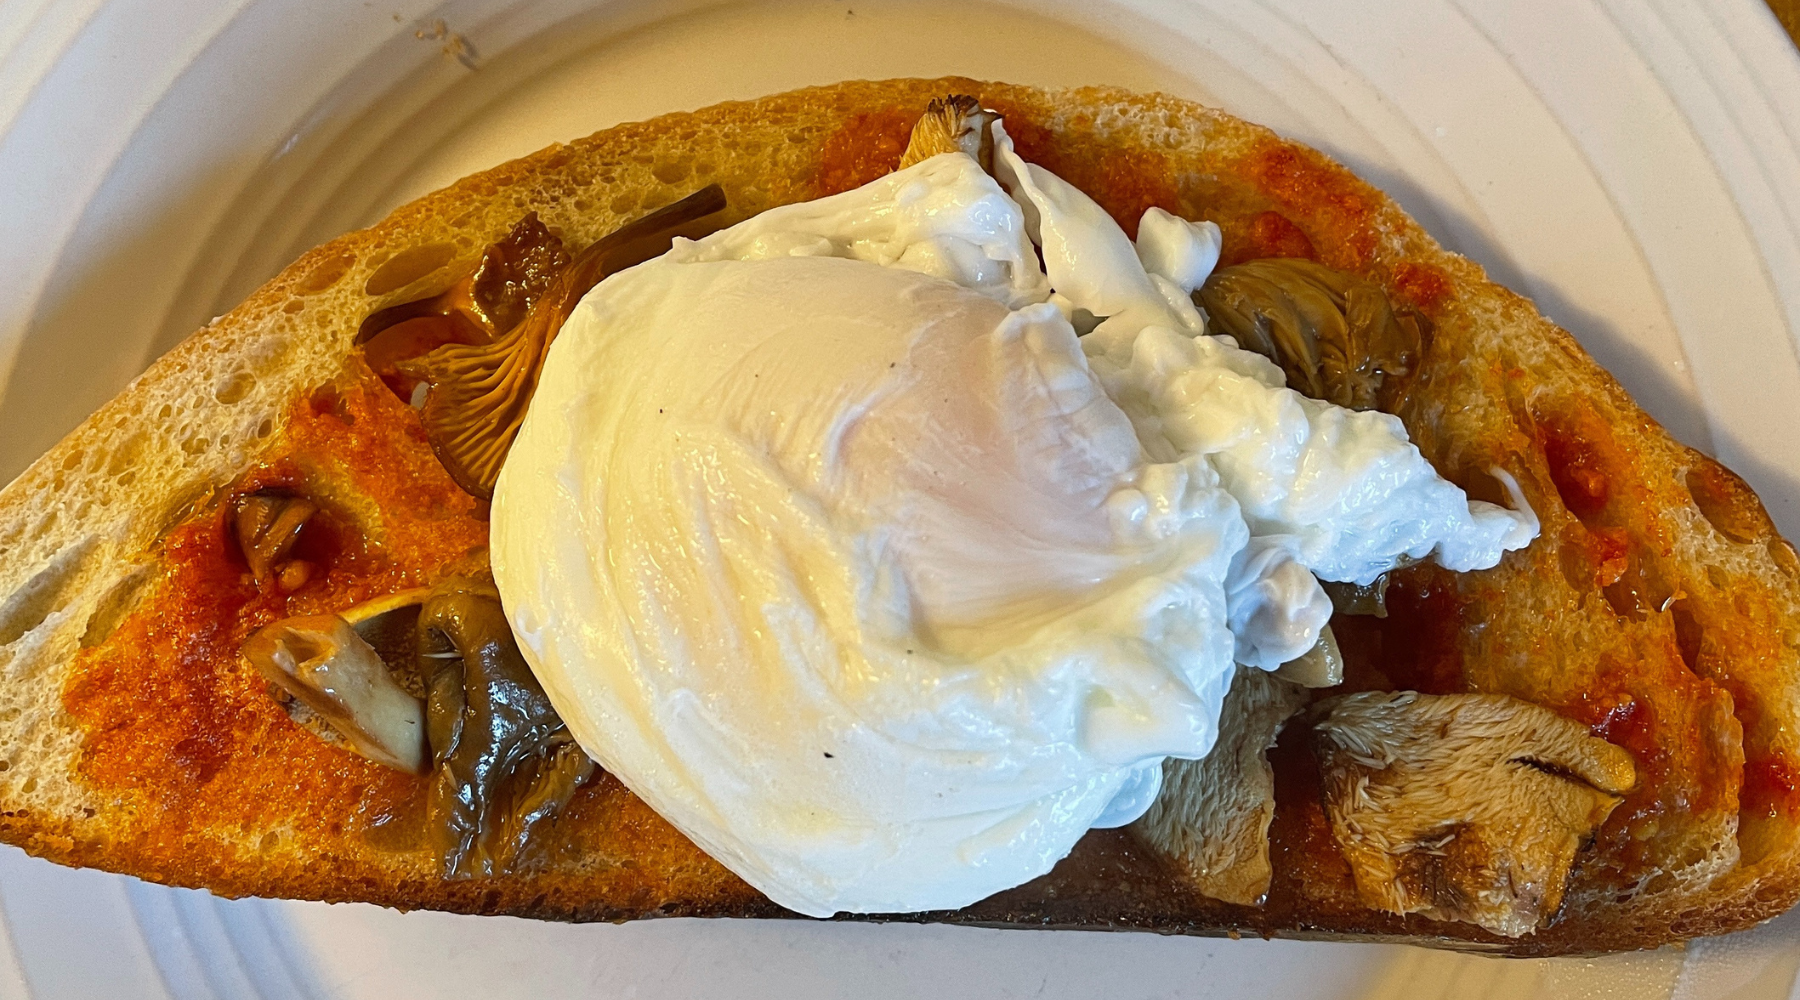 Savory wild mushroom and tomato butter toast with a poached egg